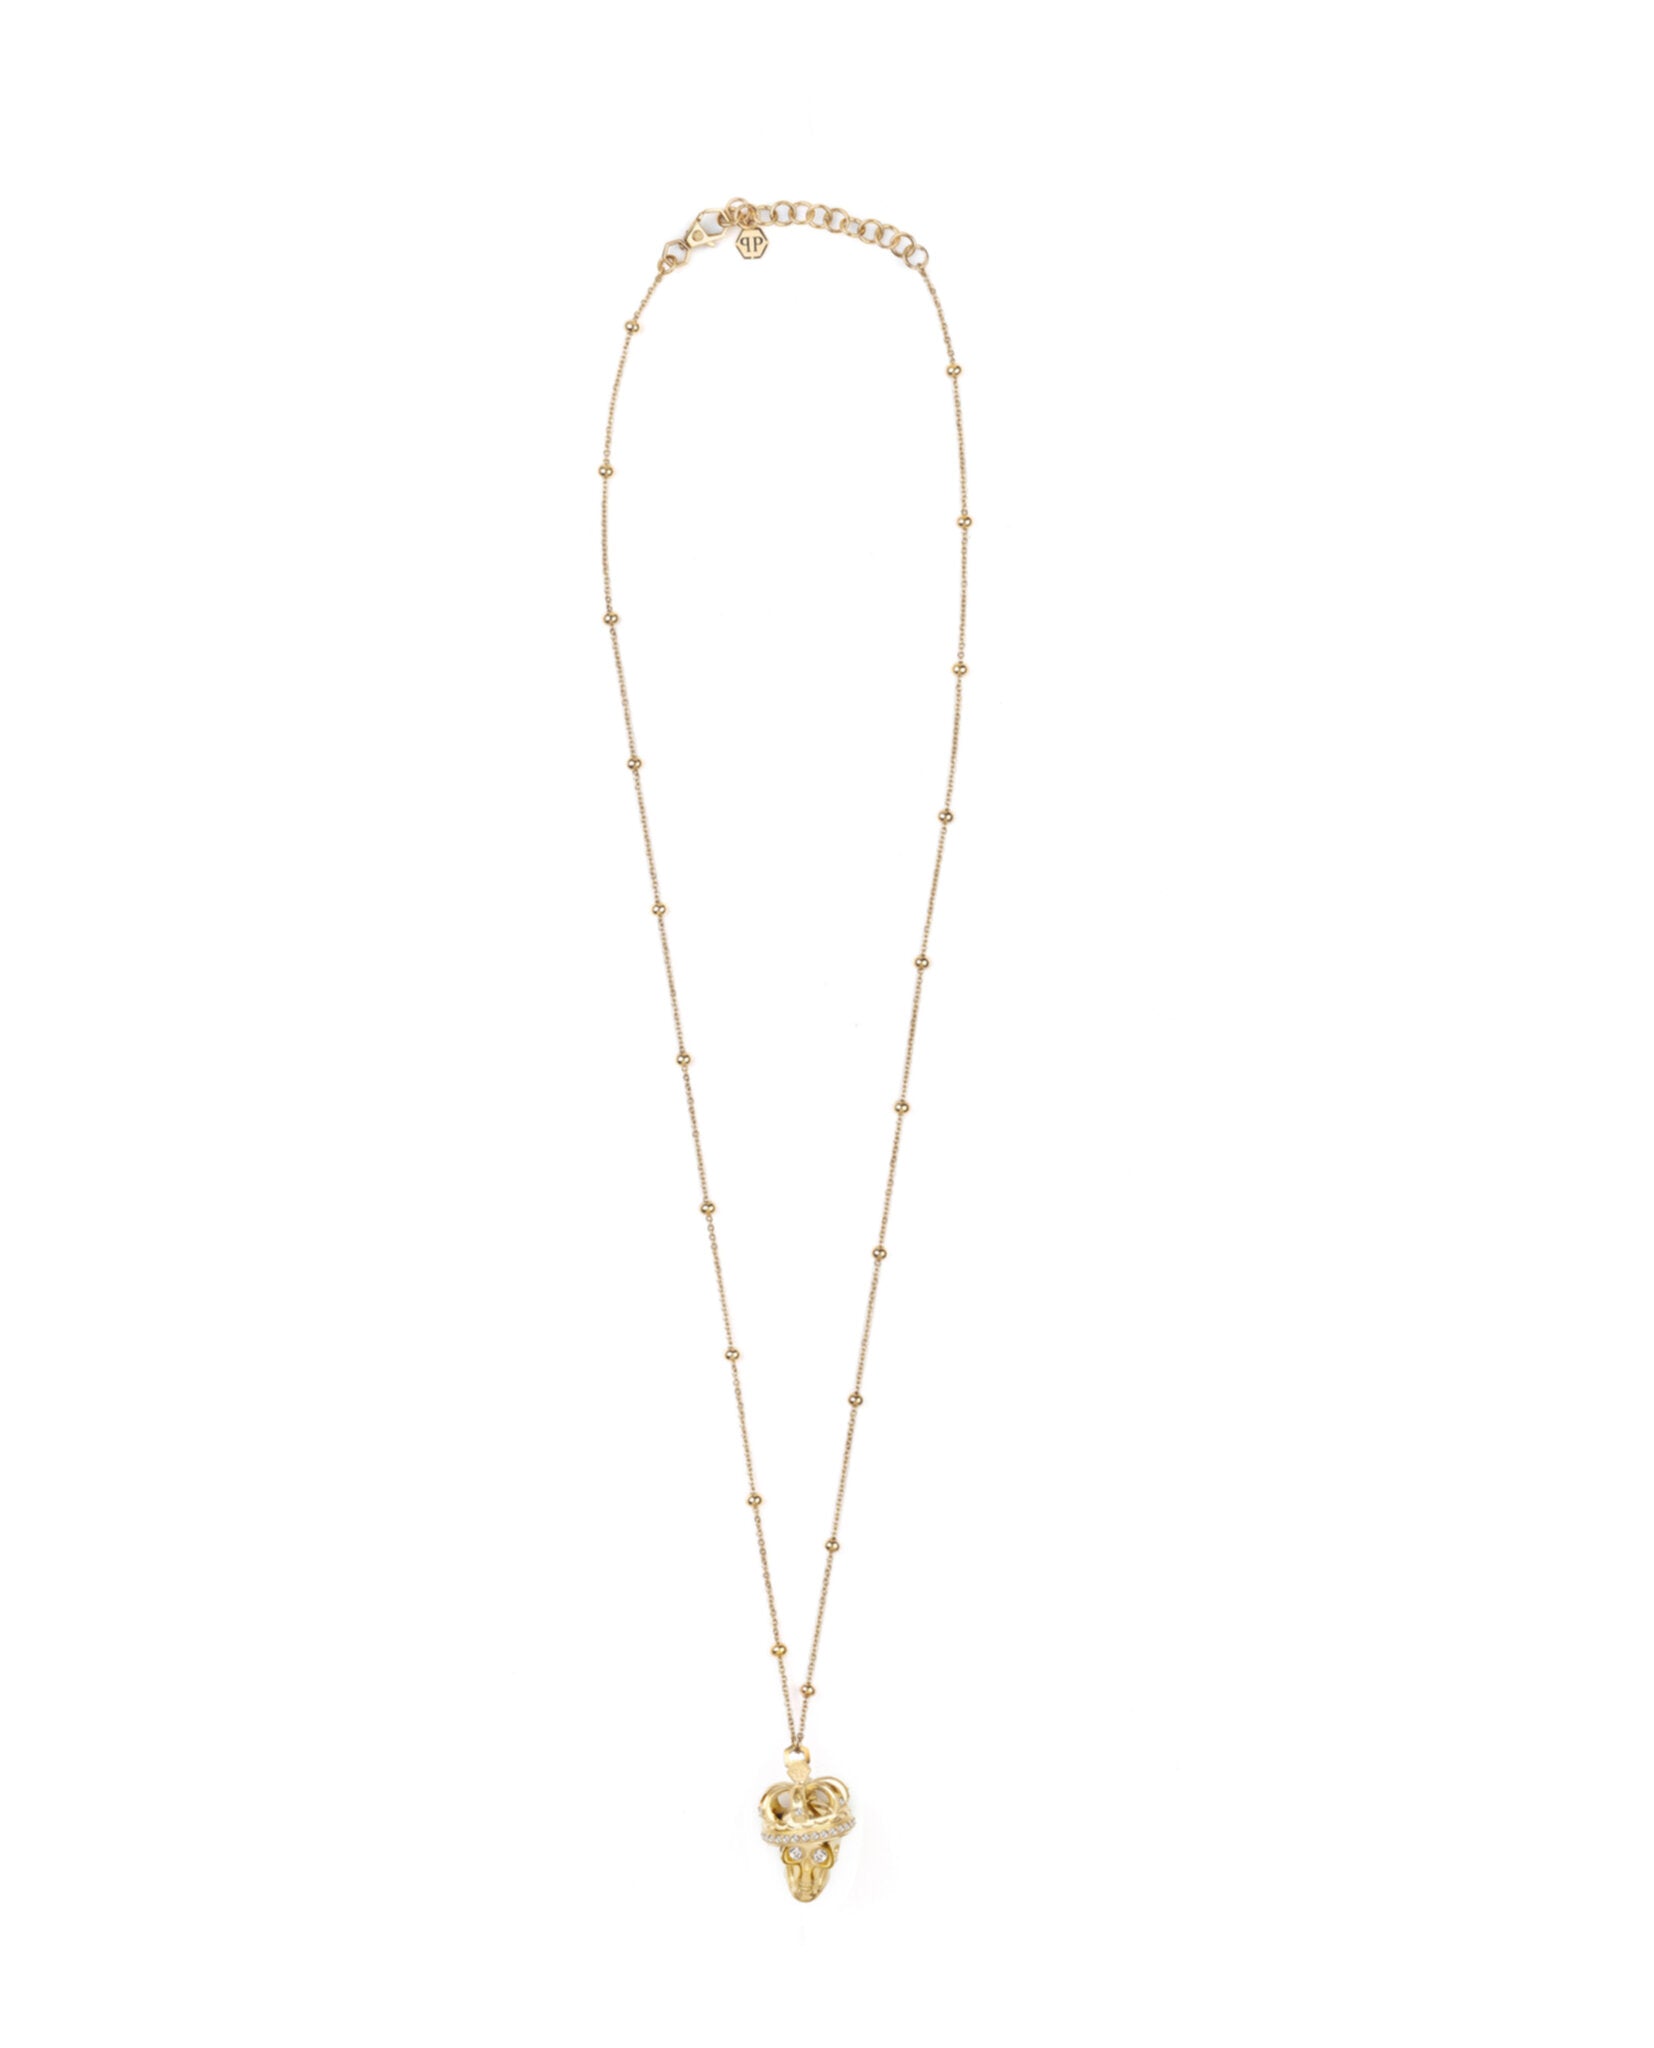 $kull Crown Crystal Cable Chain Necklace